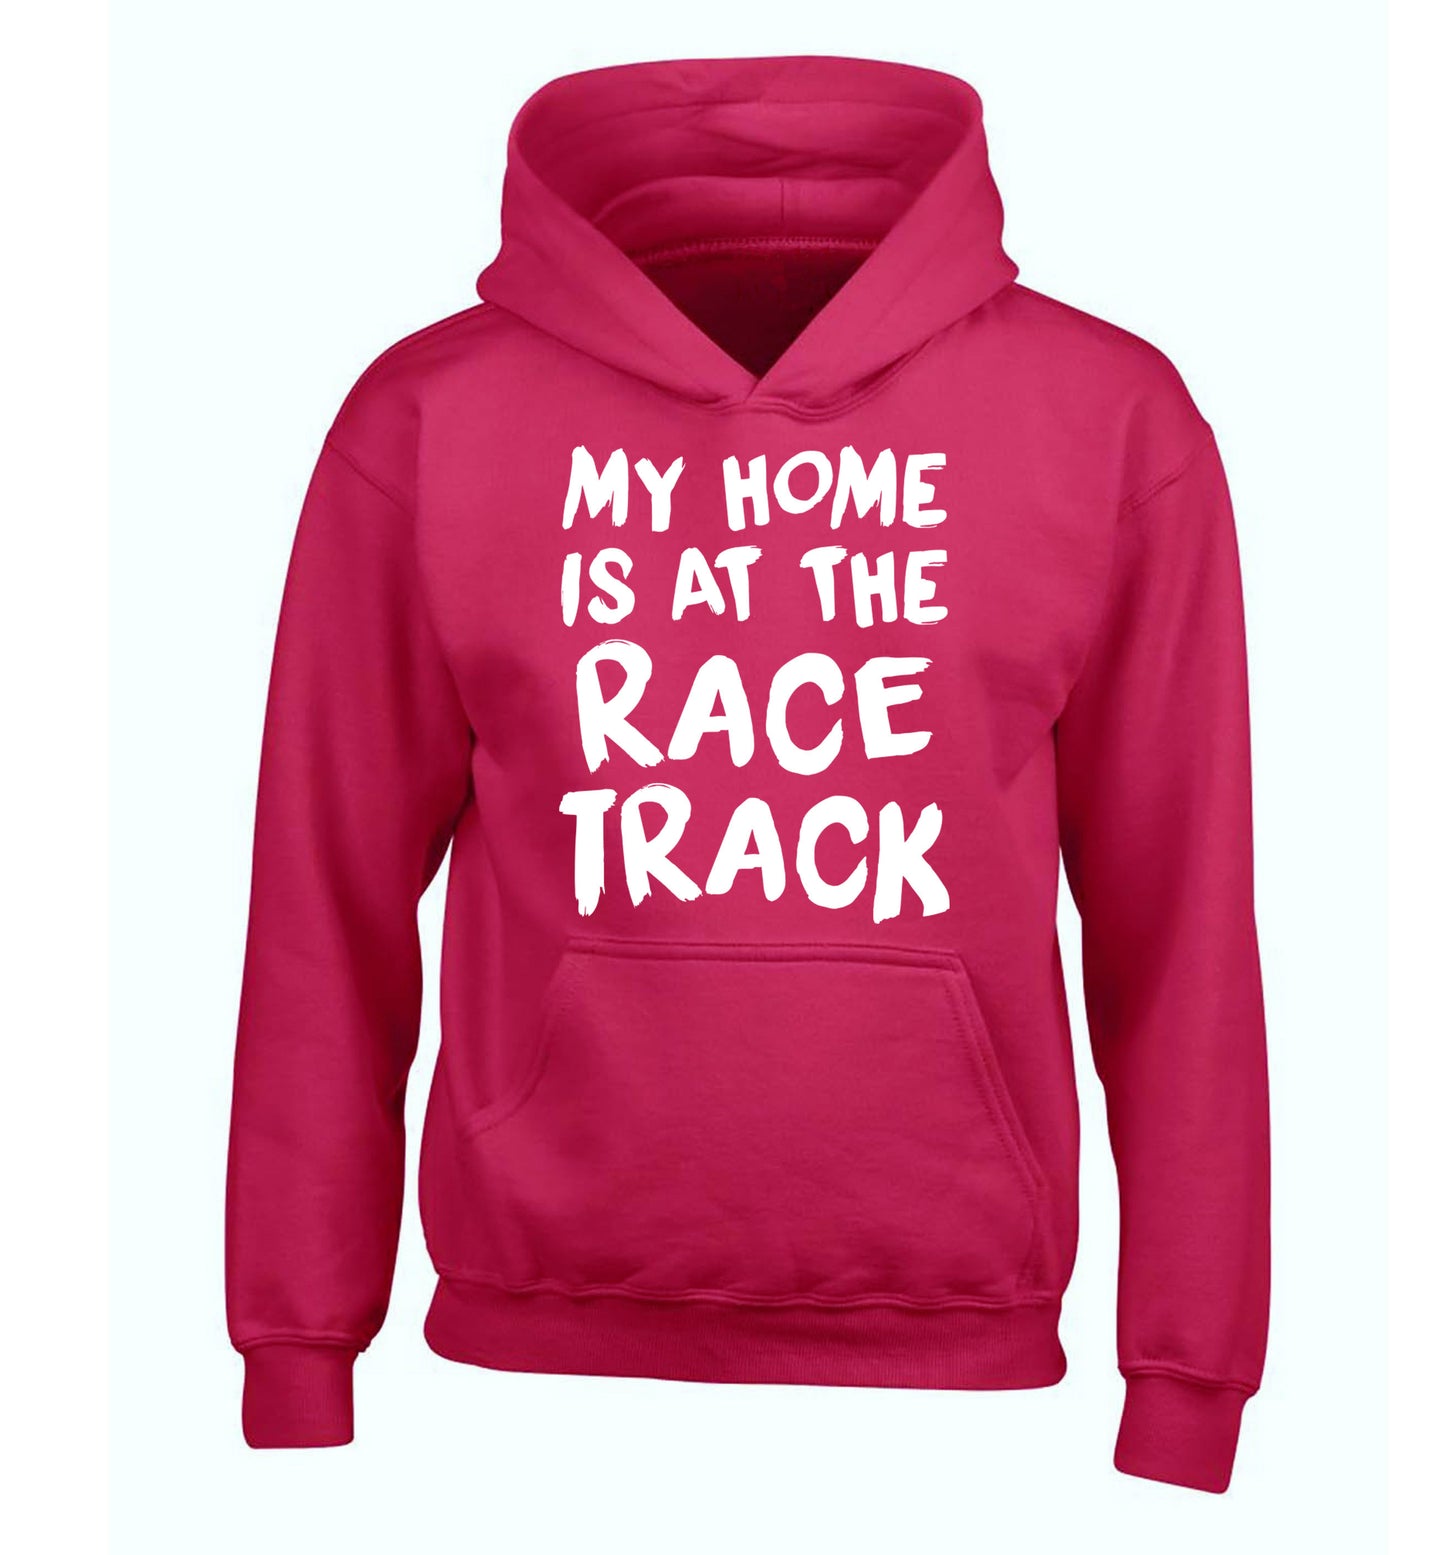 My home is at the race track children's pink hoodie 12-14 Years